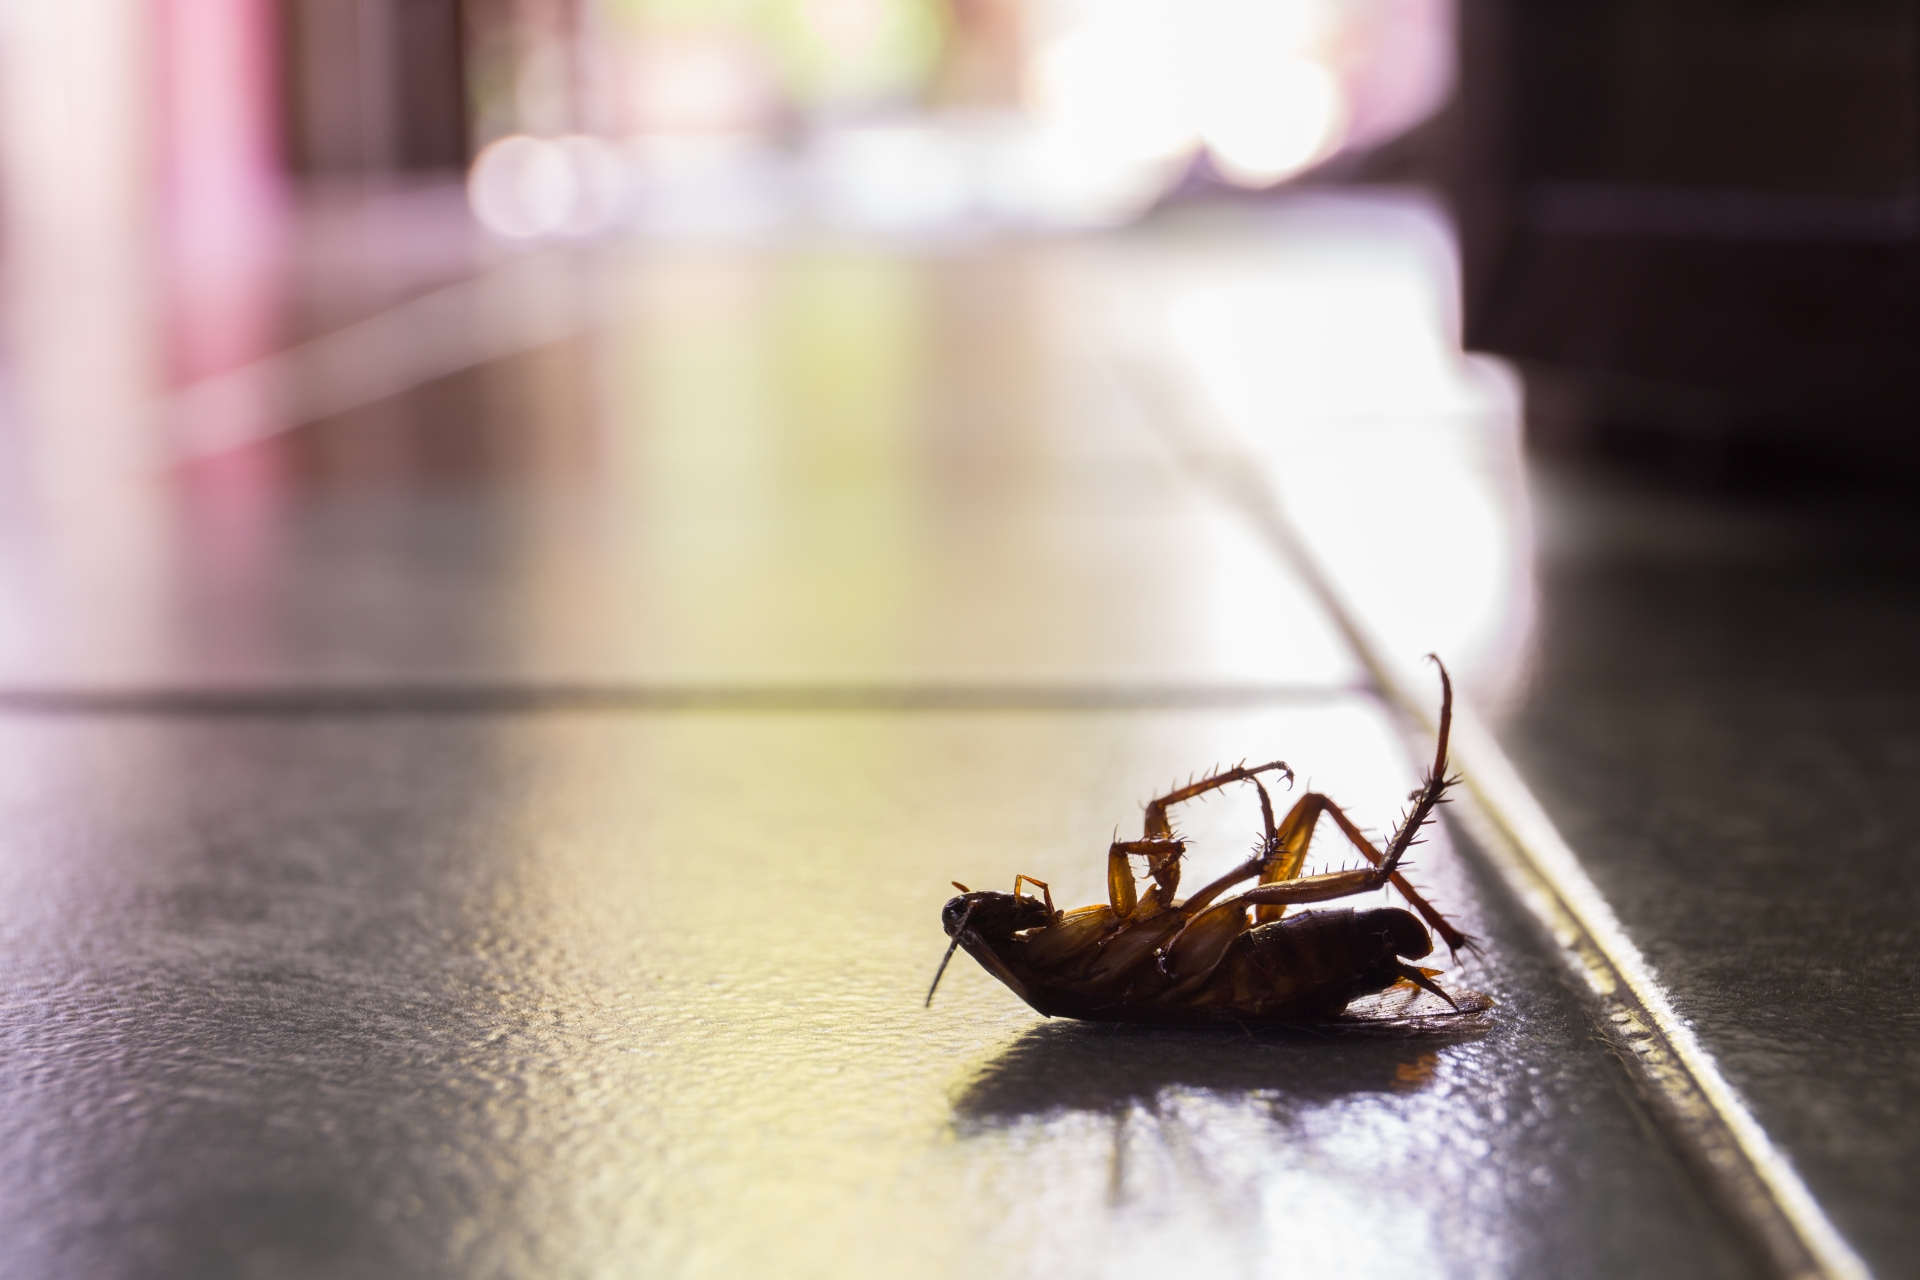 Cockroach Control, Pest Control in Ashtead, KT21. Call Now 020 8166 9746